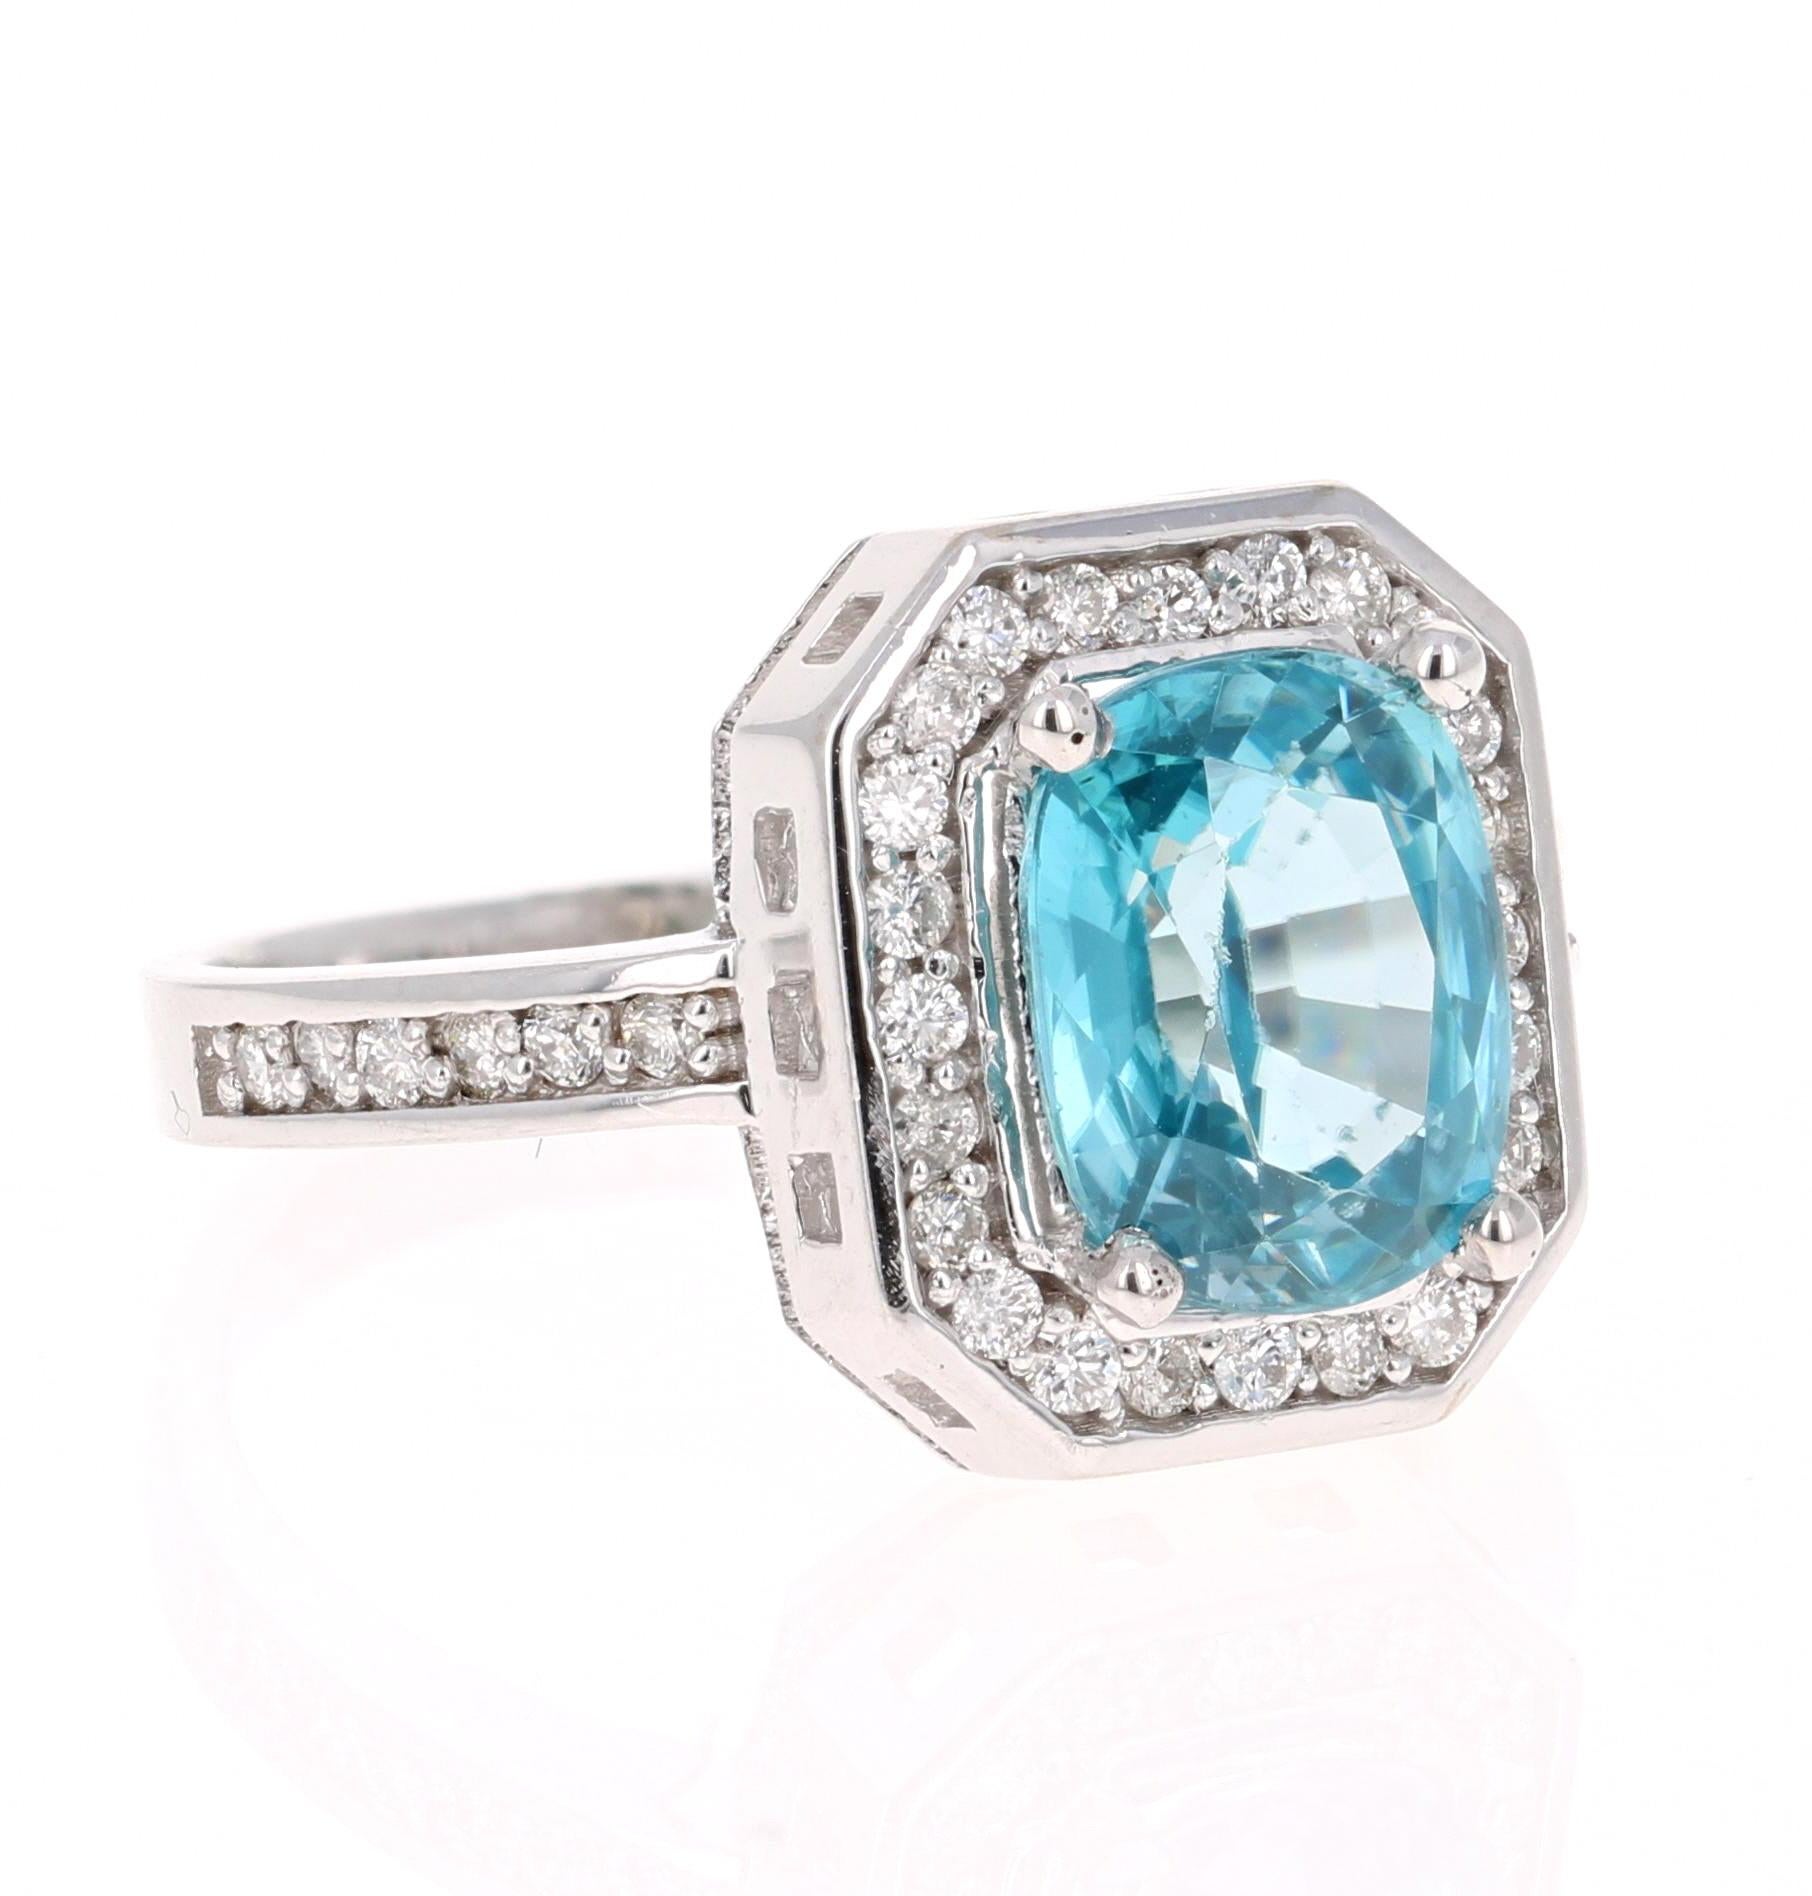 A beautiful Blue Zircon and Diamond ring that can be a nice Engagement ring or just an everyday ring!
Blue Zircon is a natural stone mined mainly in Sri Lanka, Myanmar, and Australia.  

This ring has a beautiful Oval Cut Blue Zircon that weighs